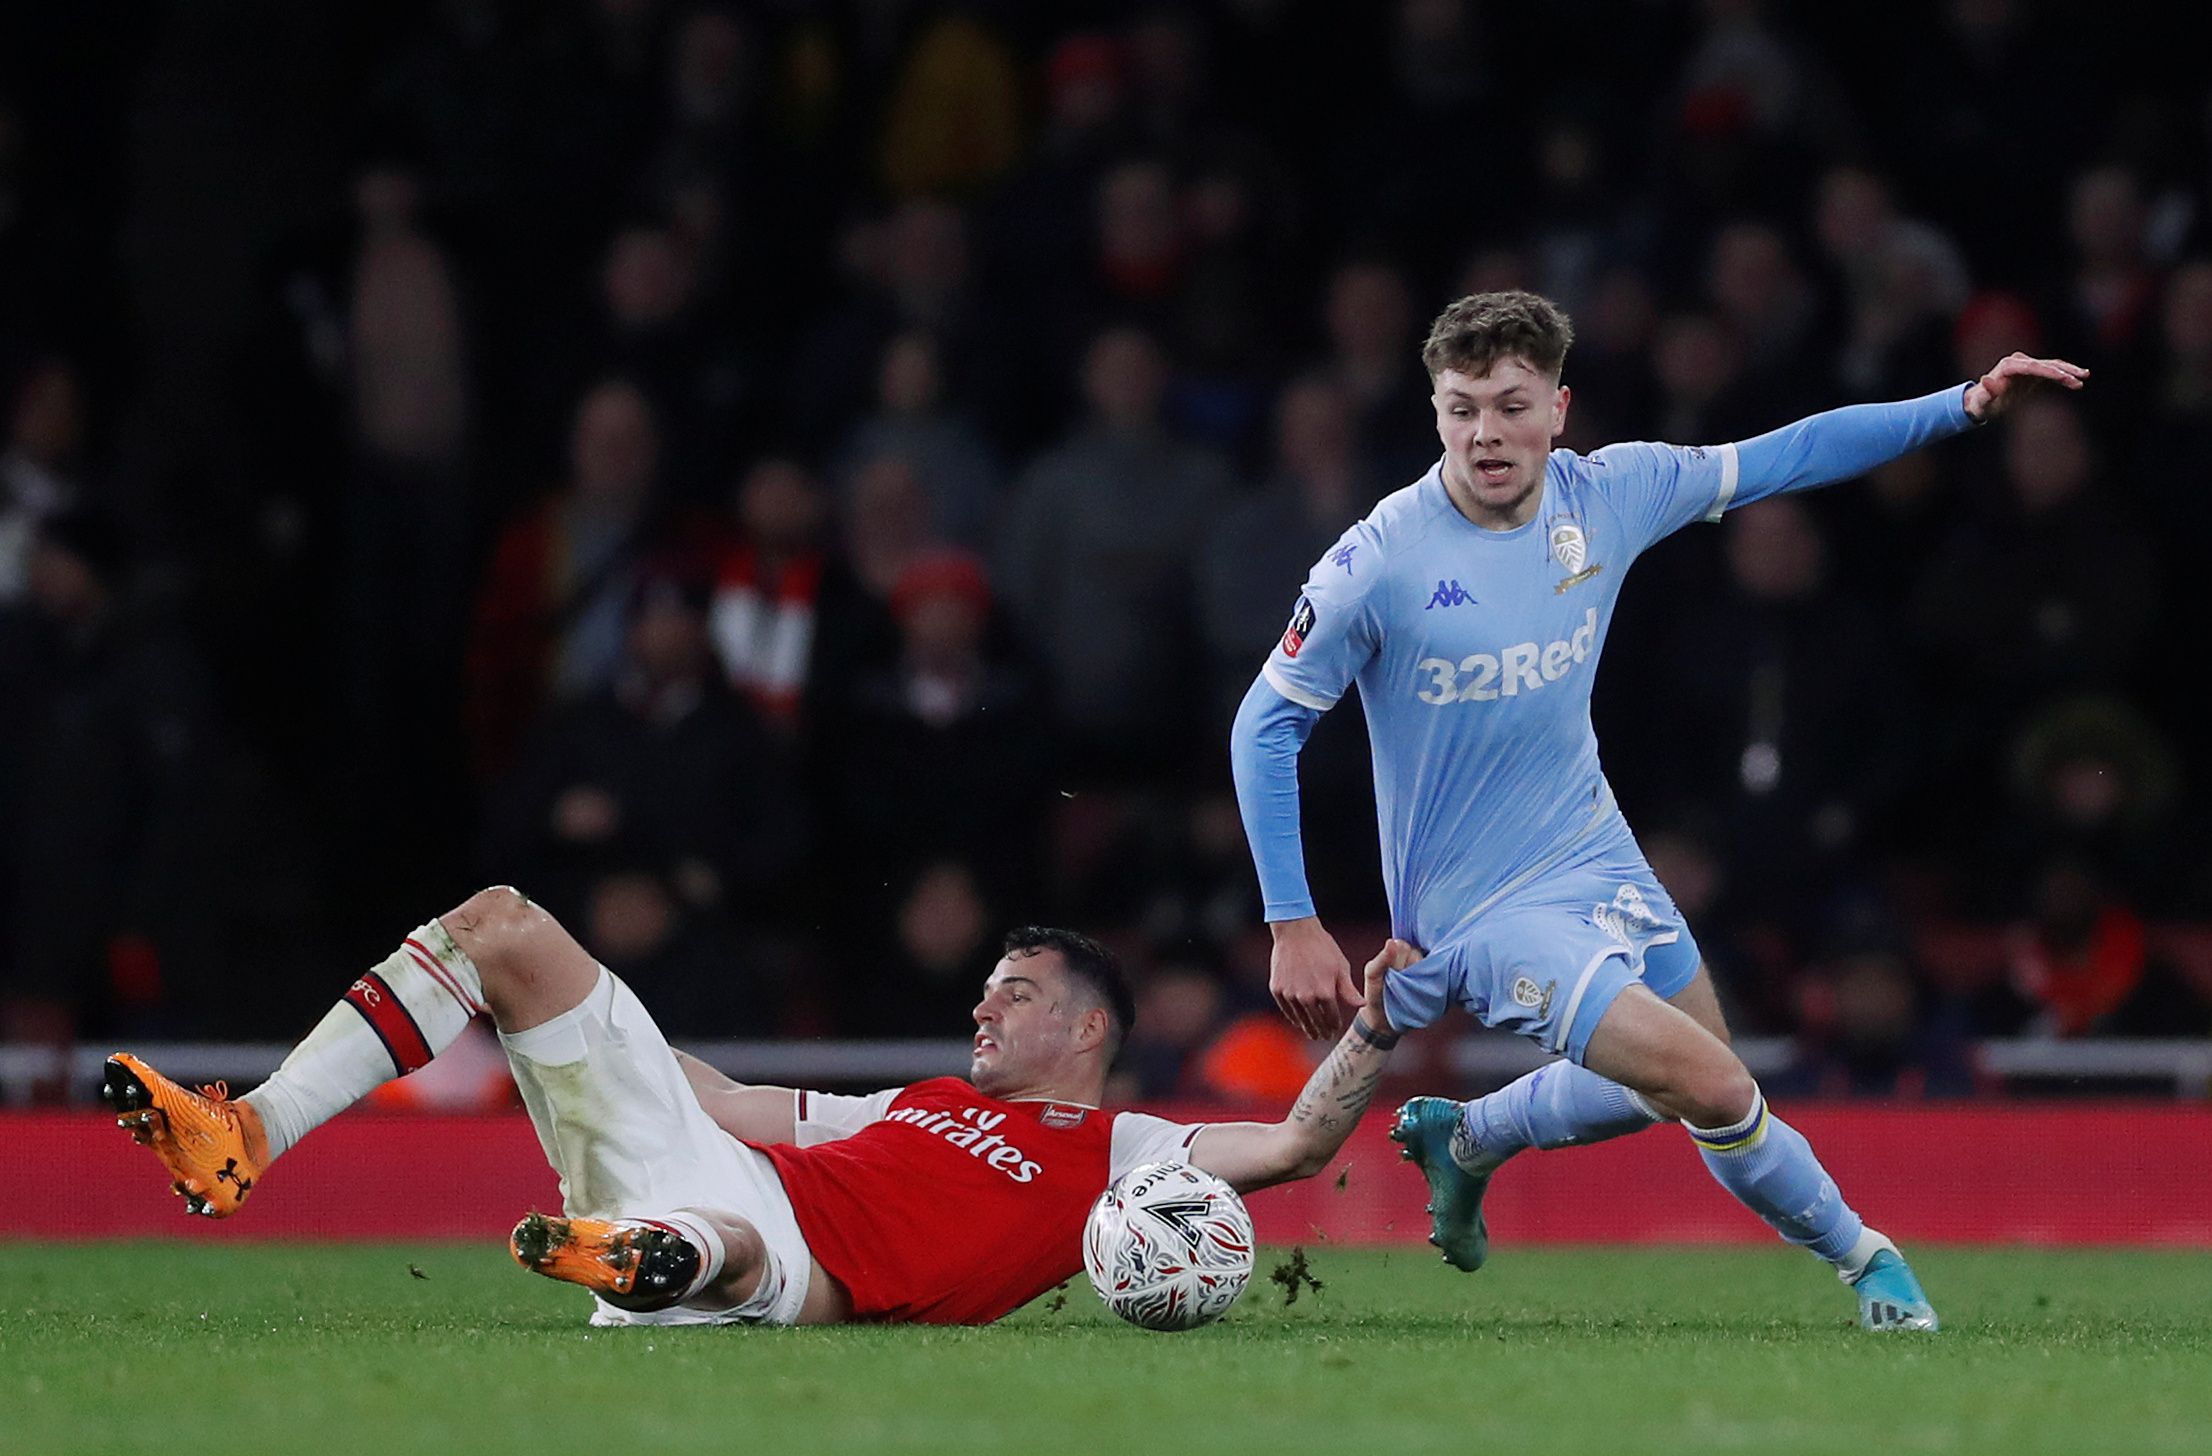 Soccer Football - FA Cup - Third Round - Arsenal v Leeds United - Emirates Stadium, London, Britain - January 6, 2020   Arsenal's Granit Xhaka in action with Leeds United's Jordan Stevens   Action Images via Reuters/Matthew Childs